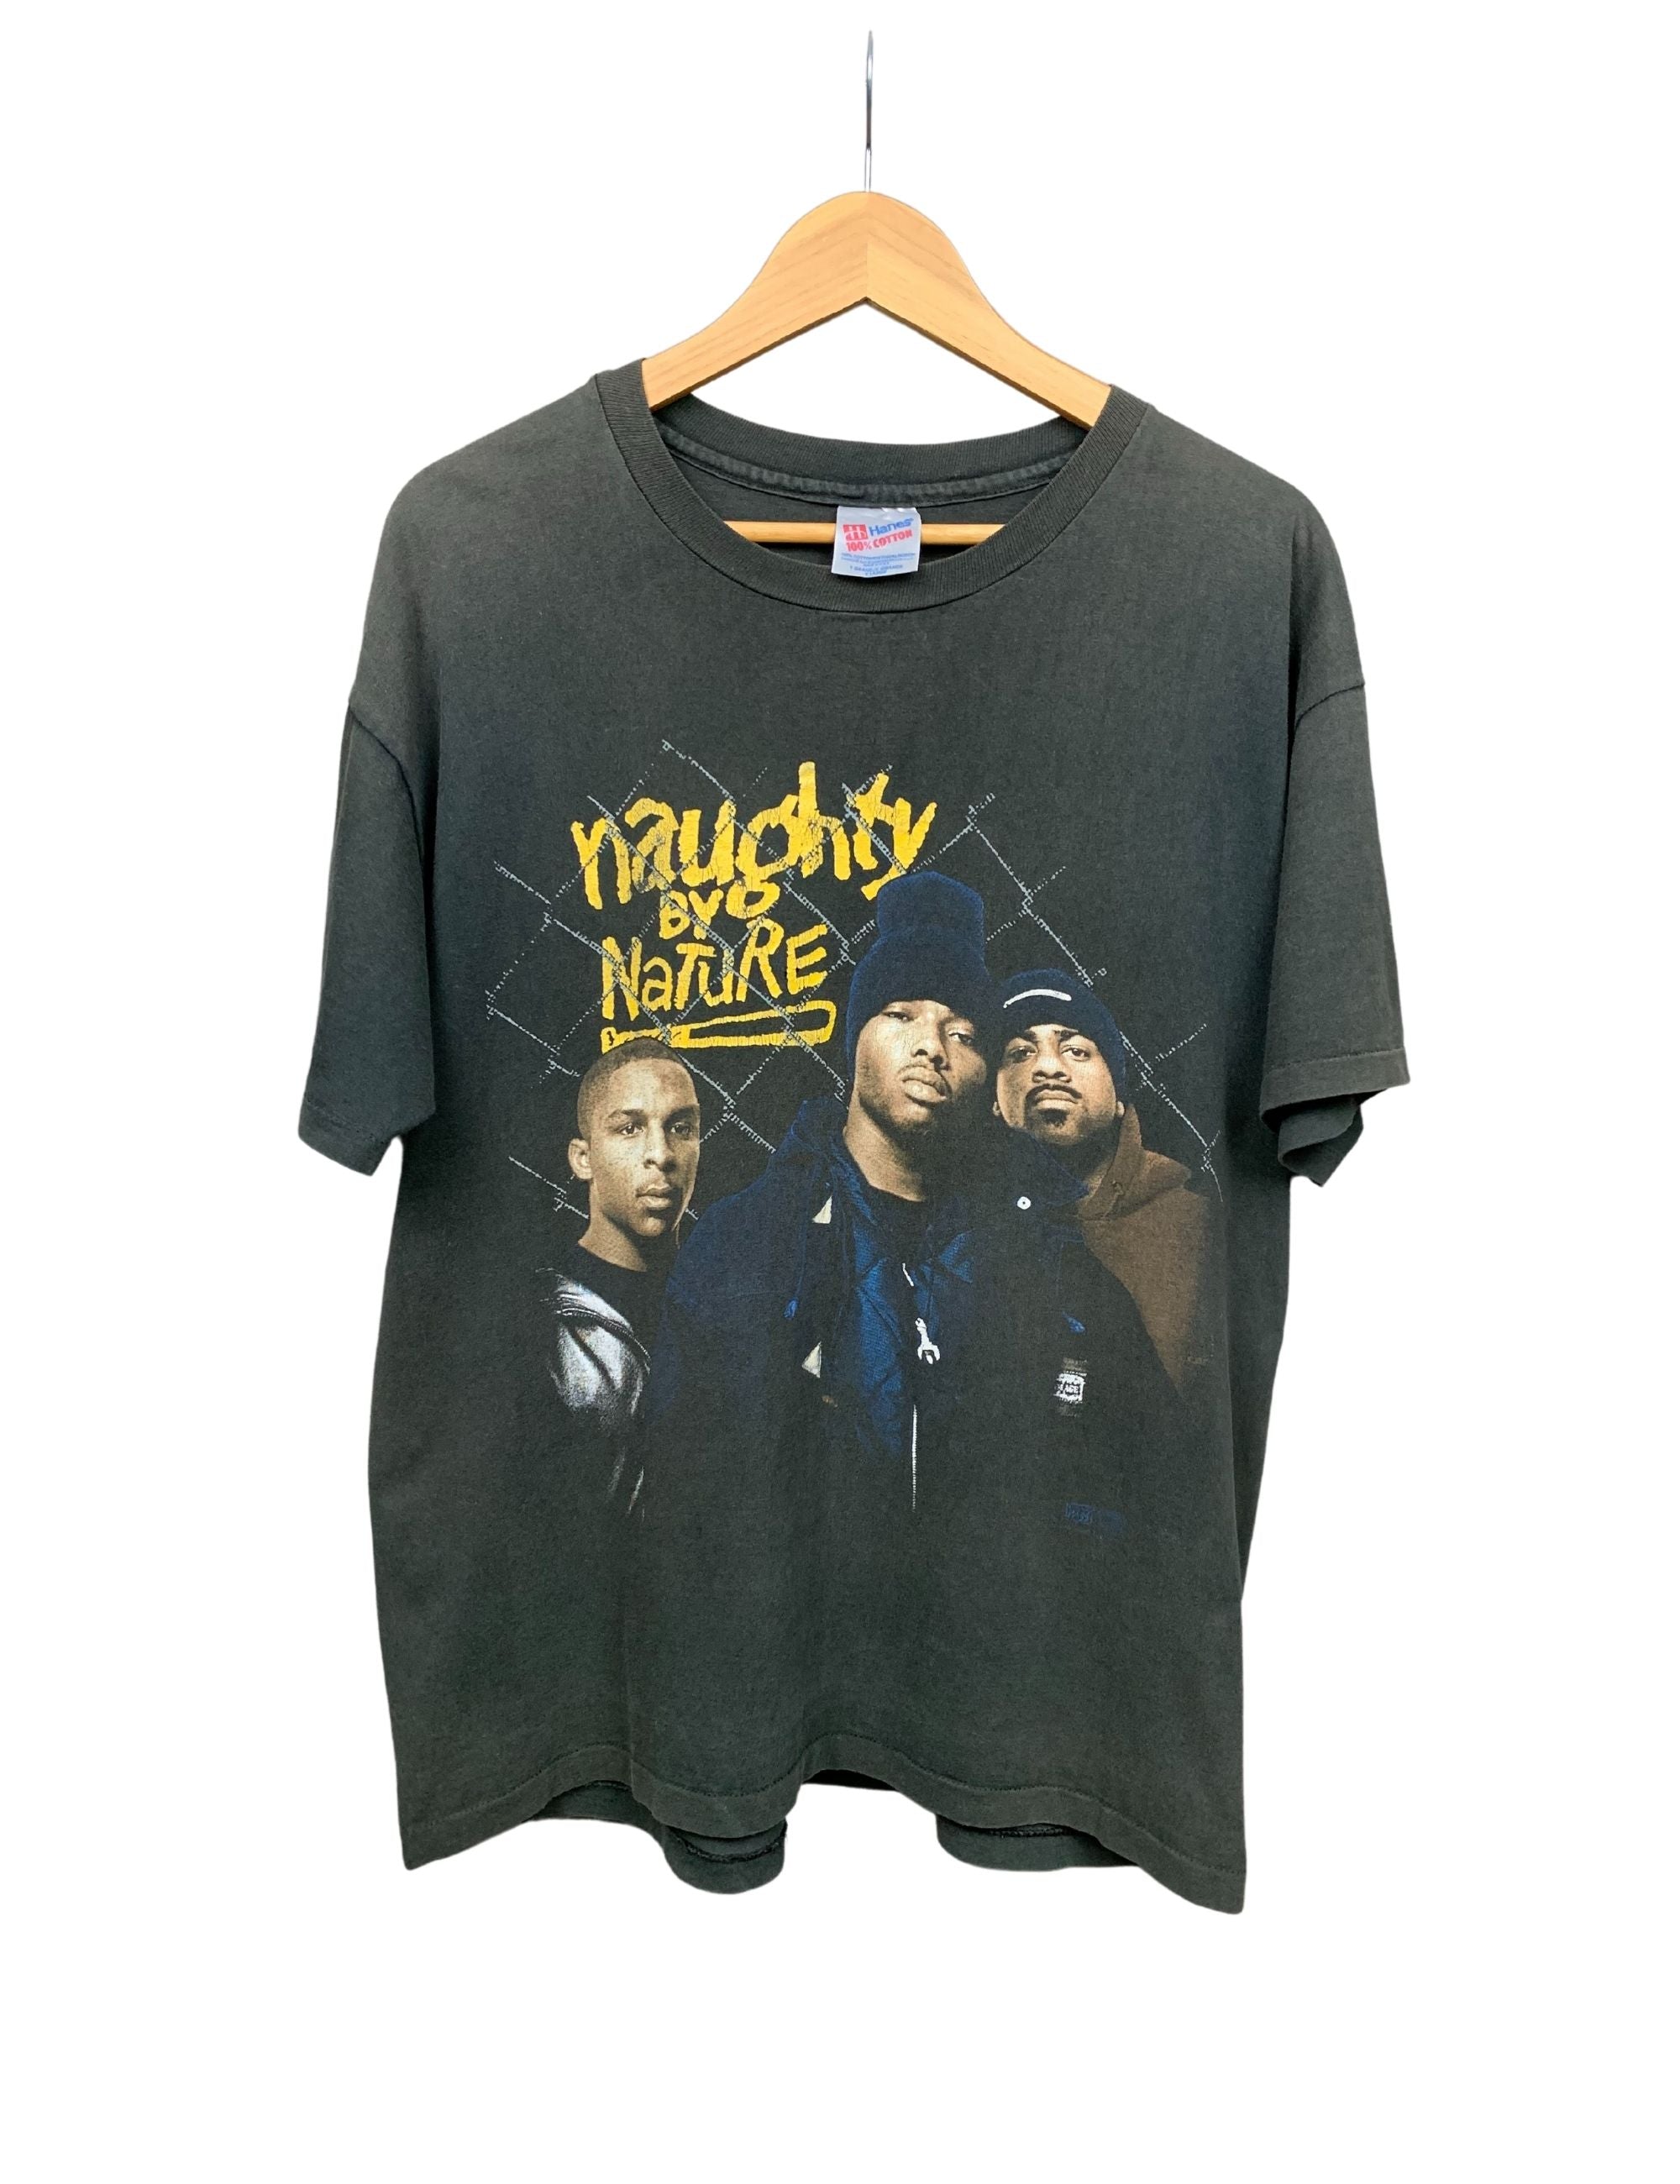 Naughty by Nature 1995 Vintage Rap T-Shirt